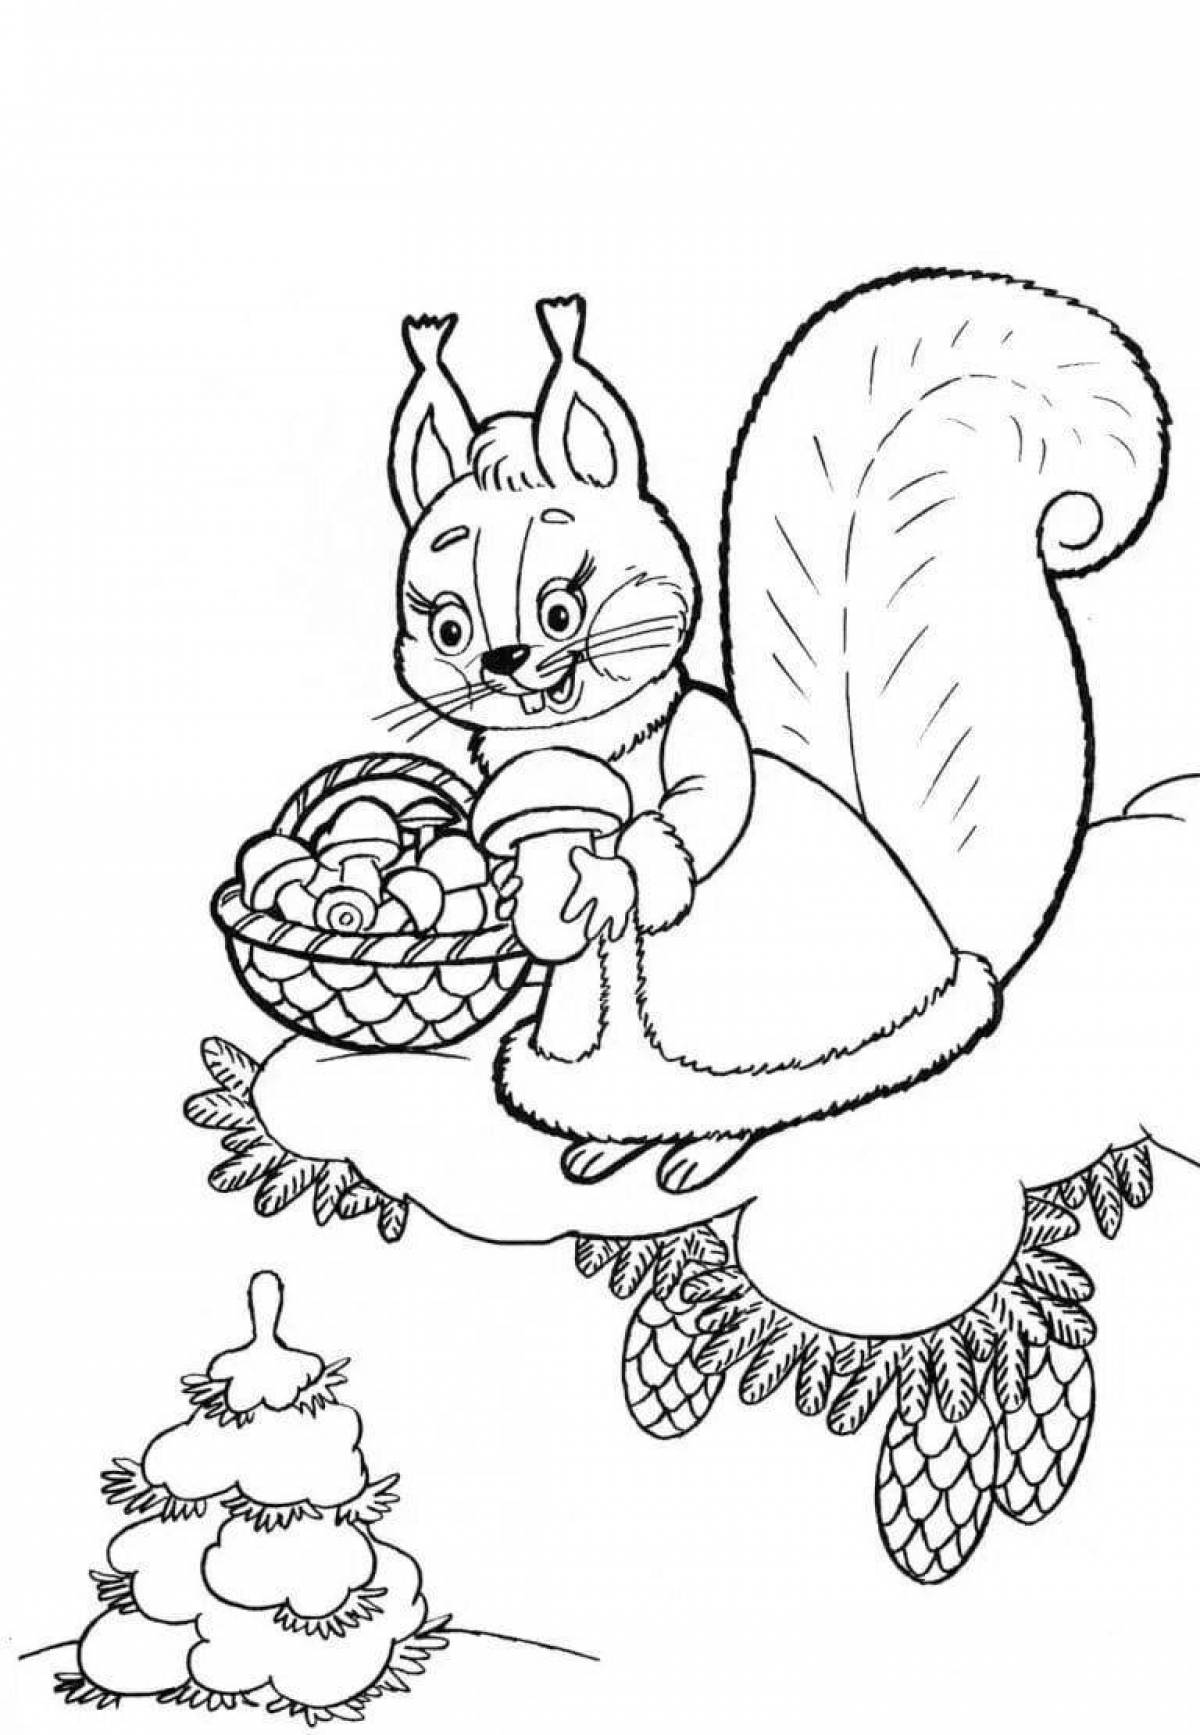 Coloring book funny little squirrel